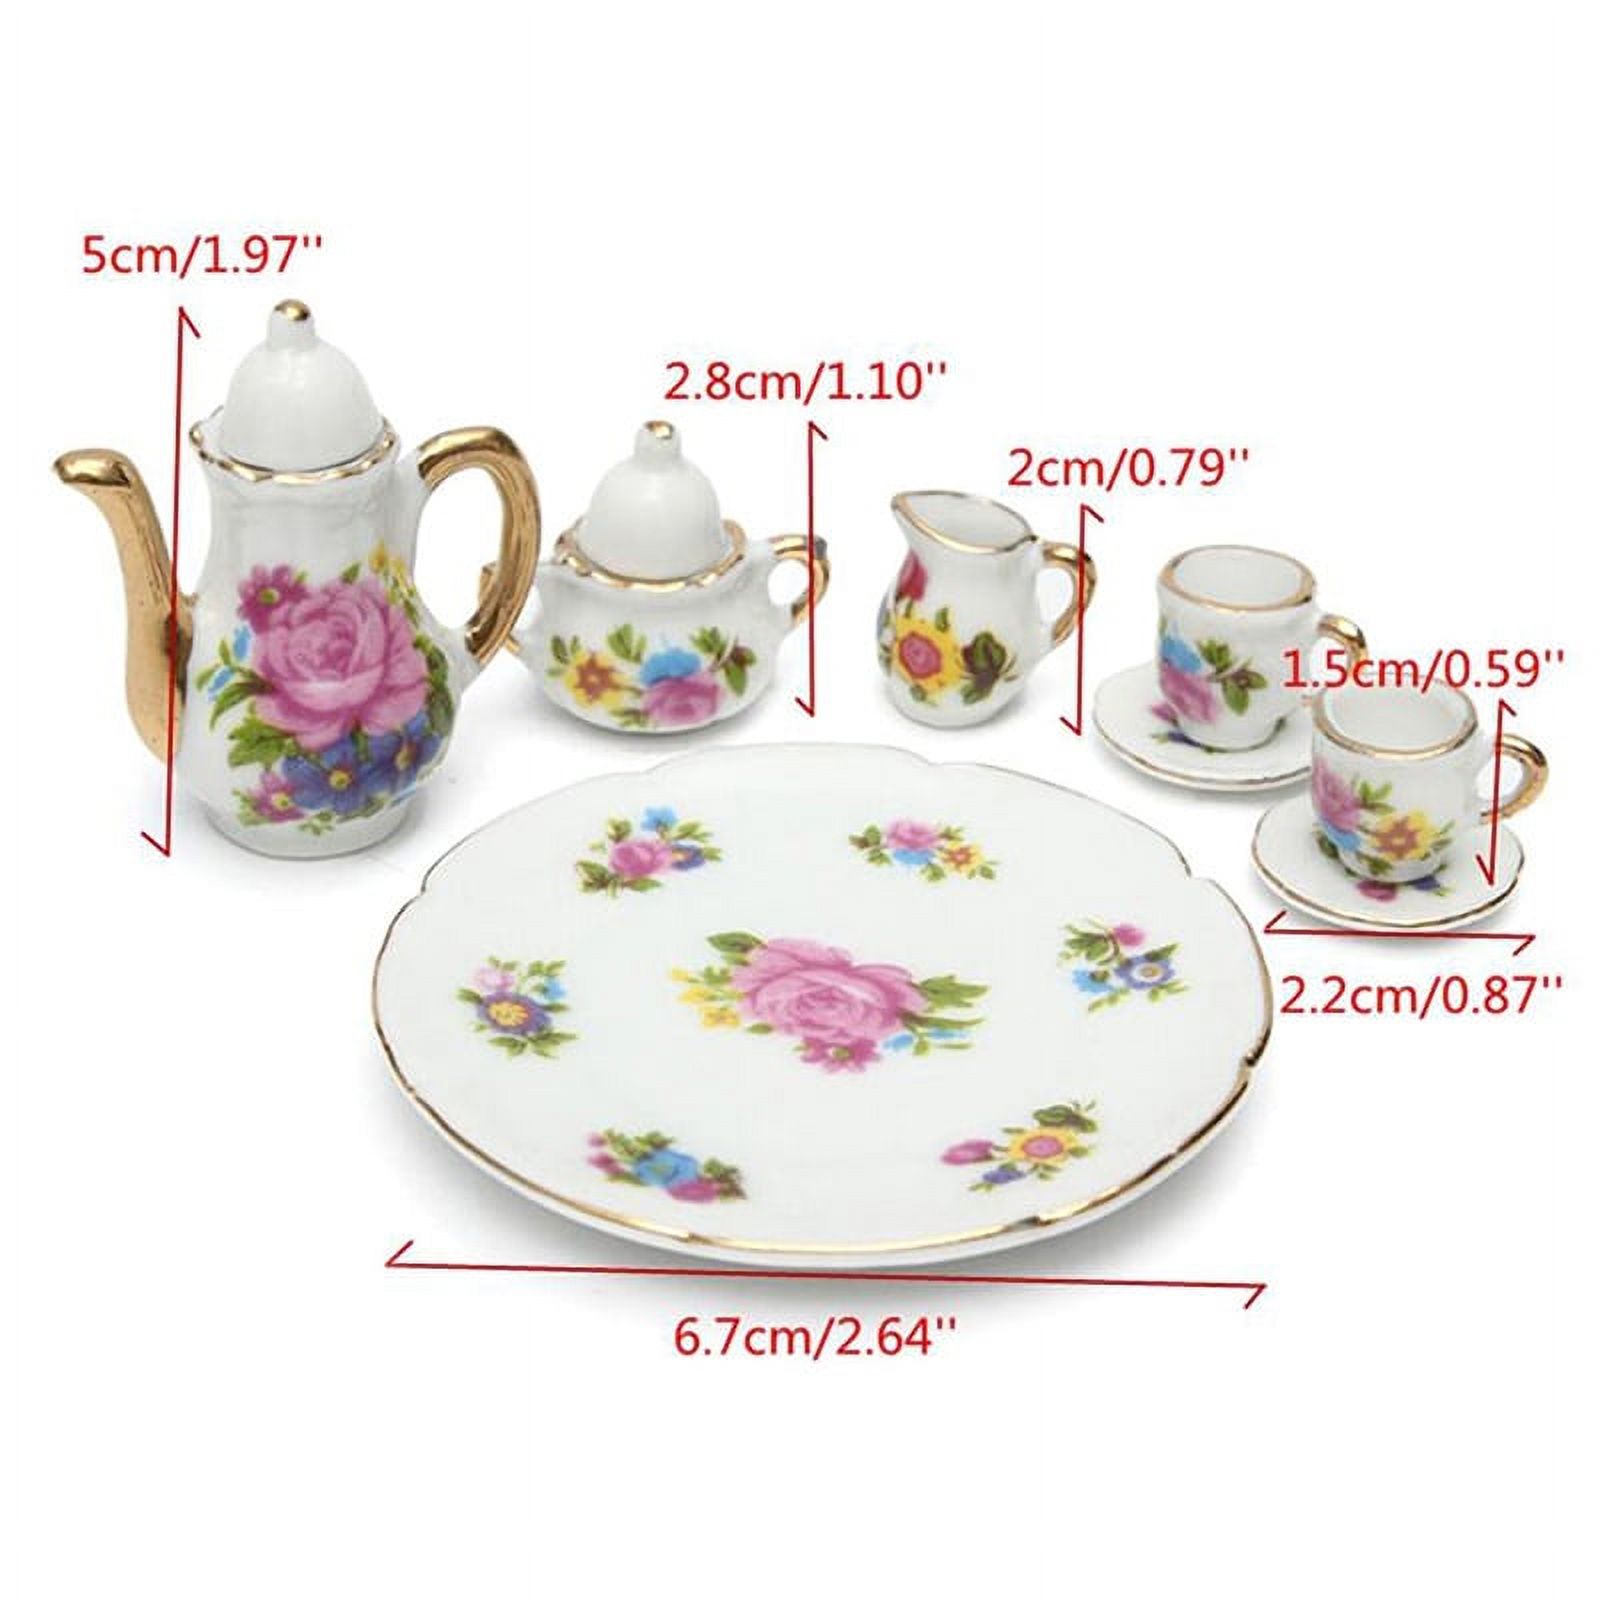 JETTINGBUY Dollhouse Miniature Dining Ware Porcelain; Tea Set Dish Cup Plate - image 2 of 4